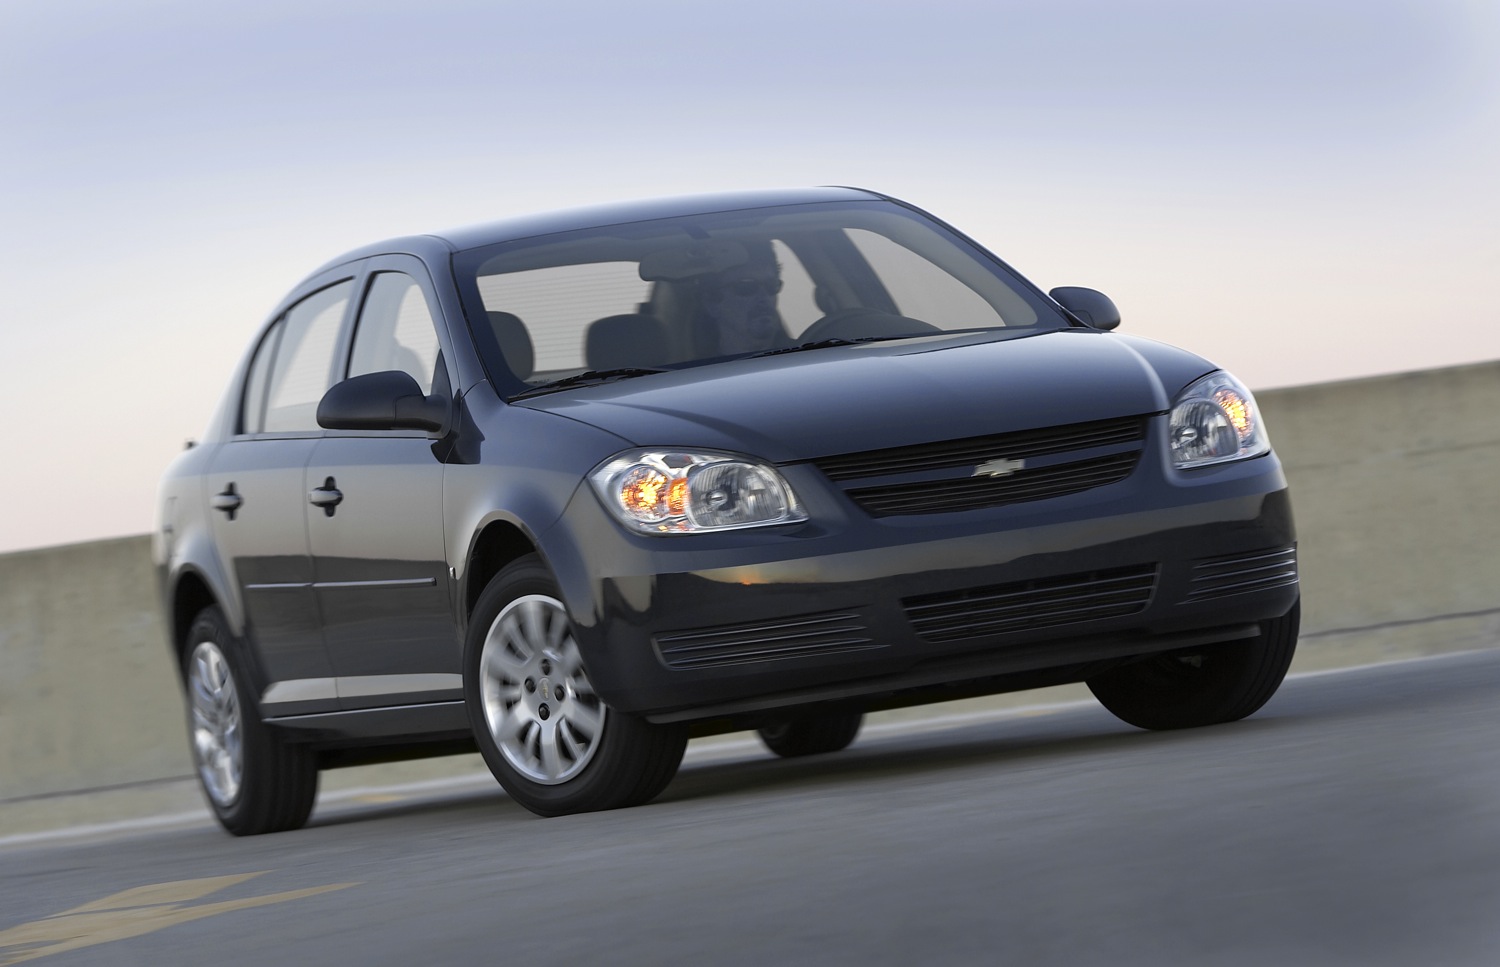 Chevy Cobalt And HHR Fuel Line Investigation Comes To An End